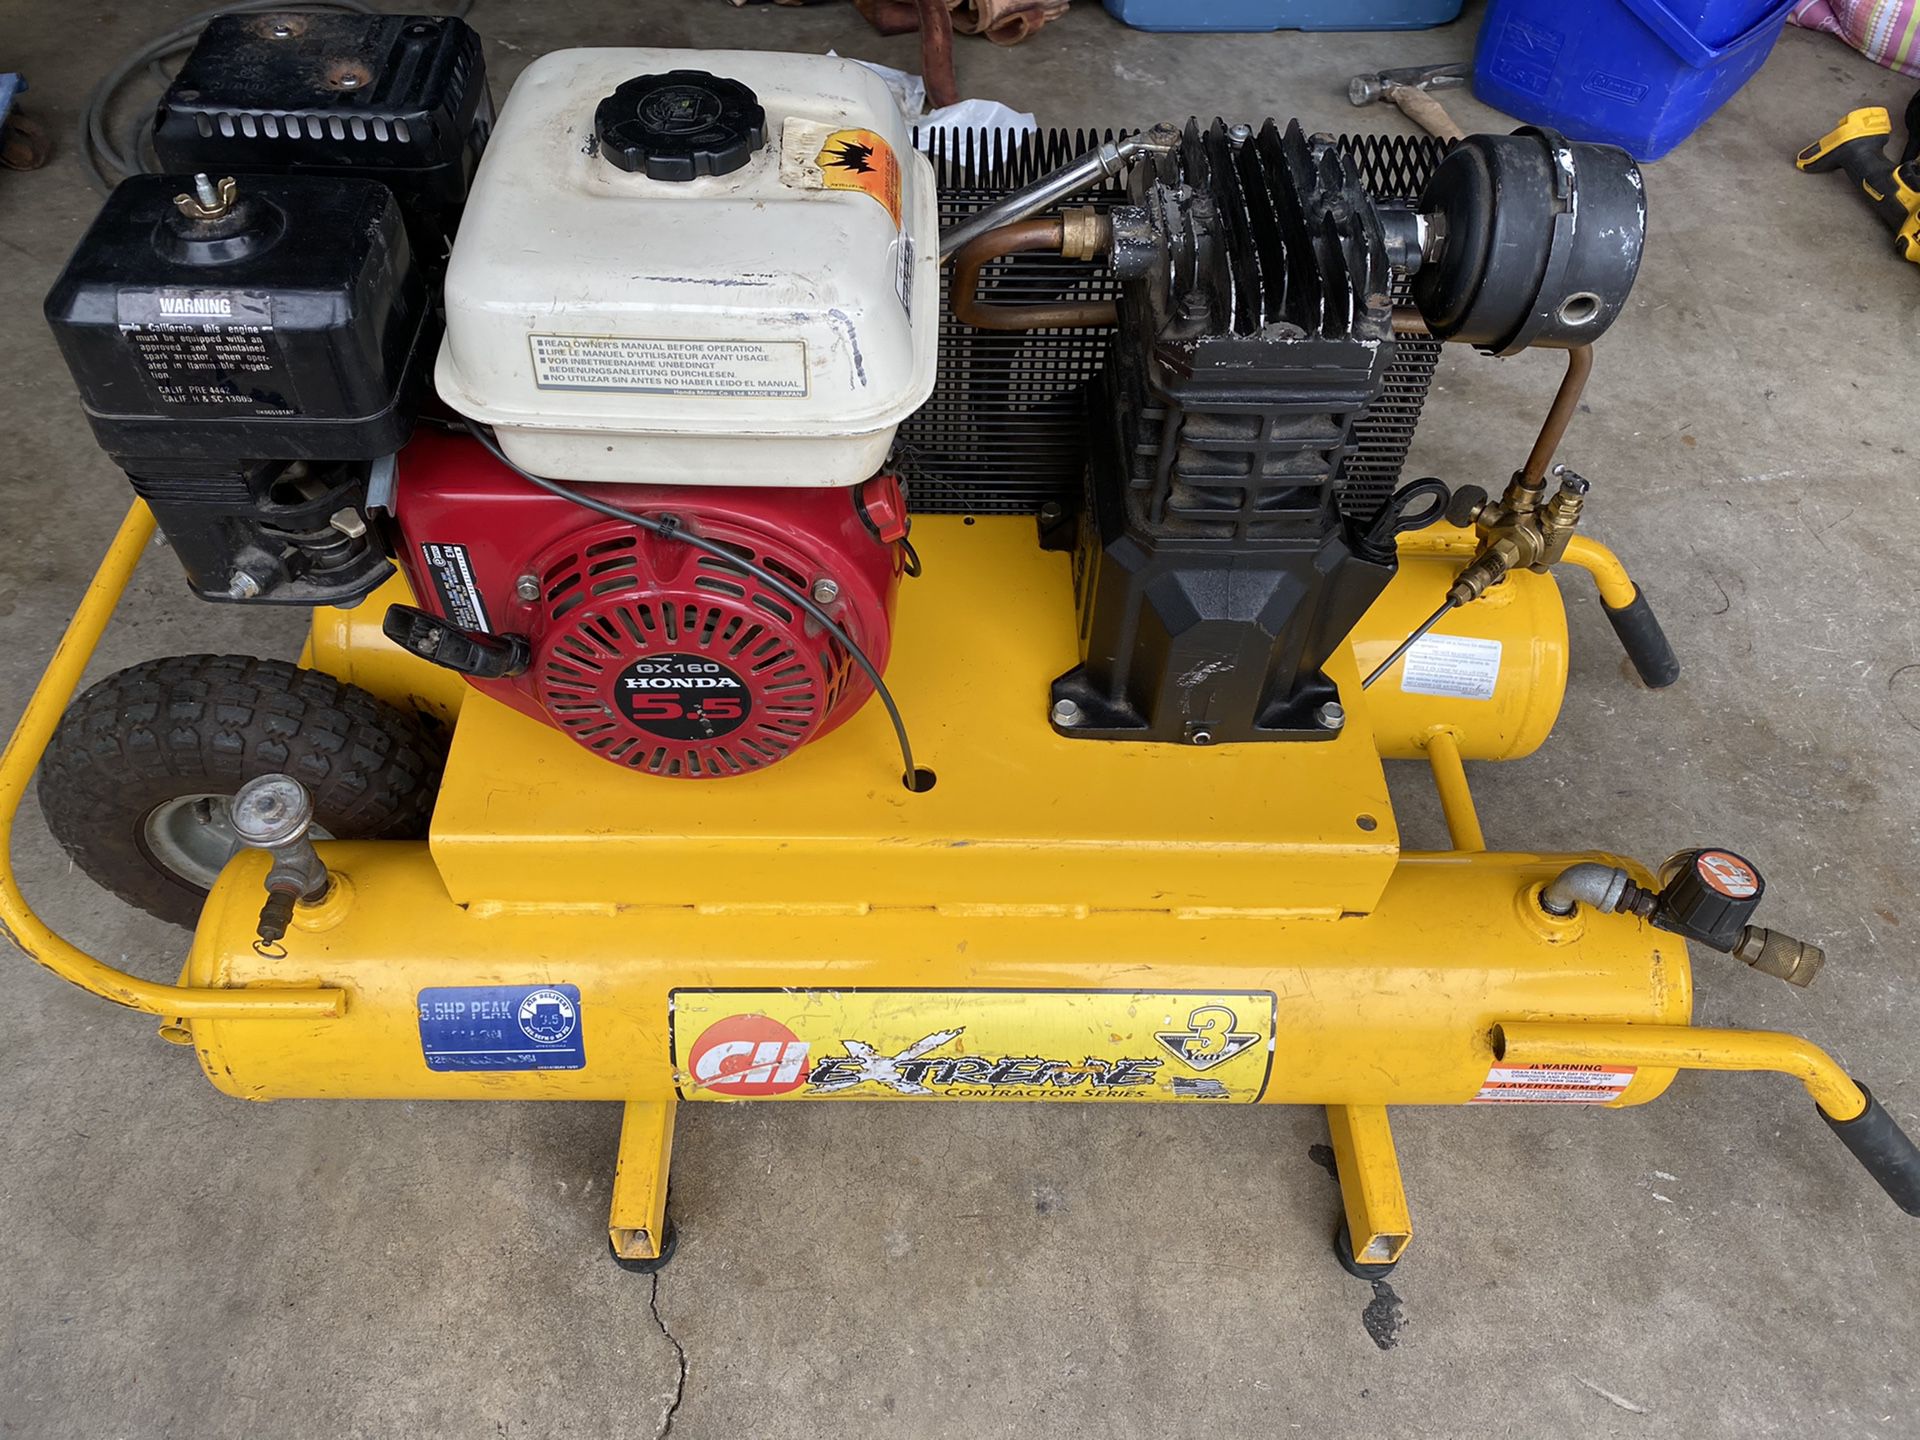 CH Extreme Contractor Series Air Compressor